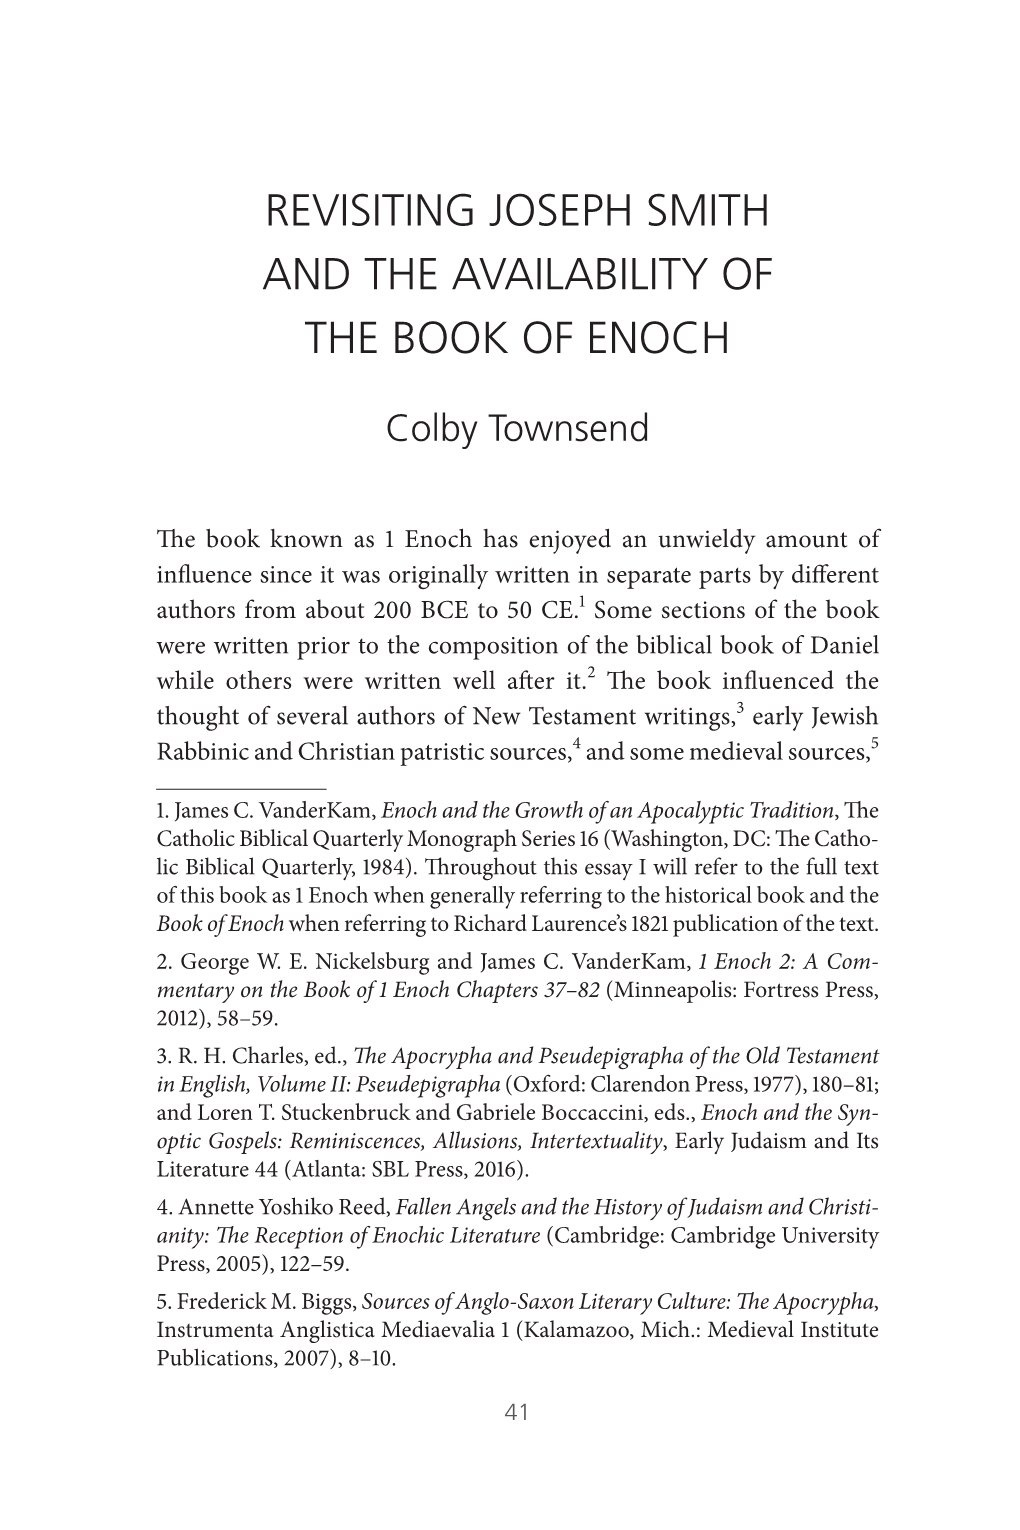 Revisiting Joseph Smith and the Availability of the Book of Enoch